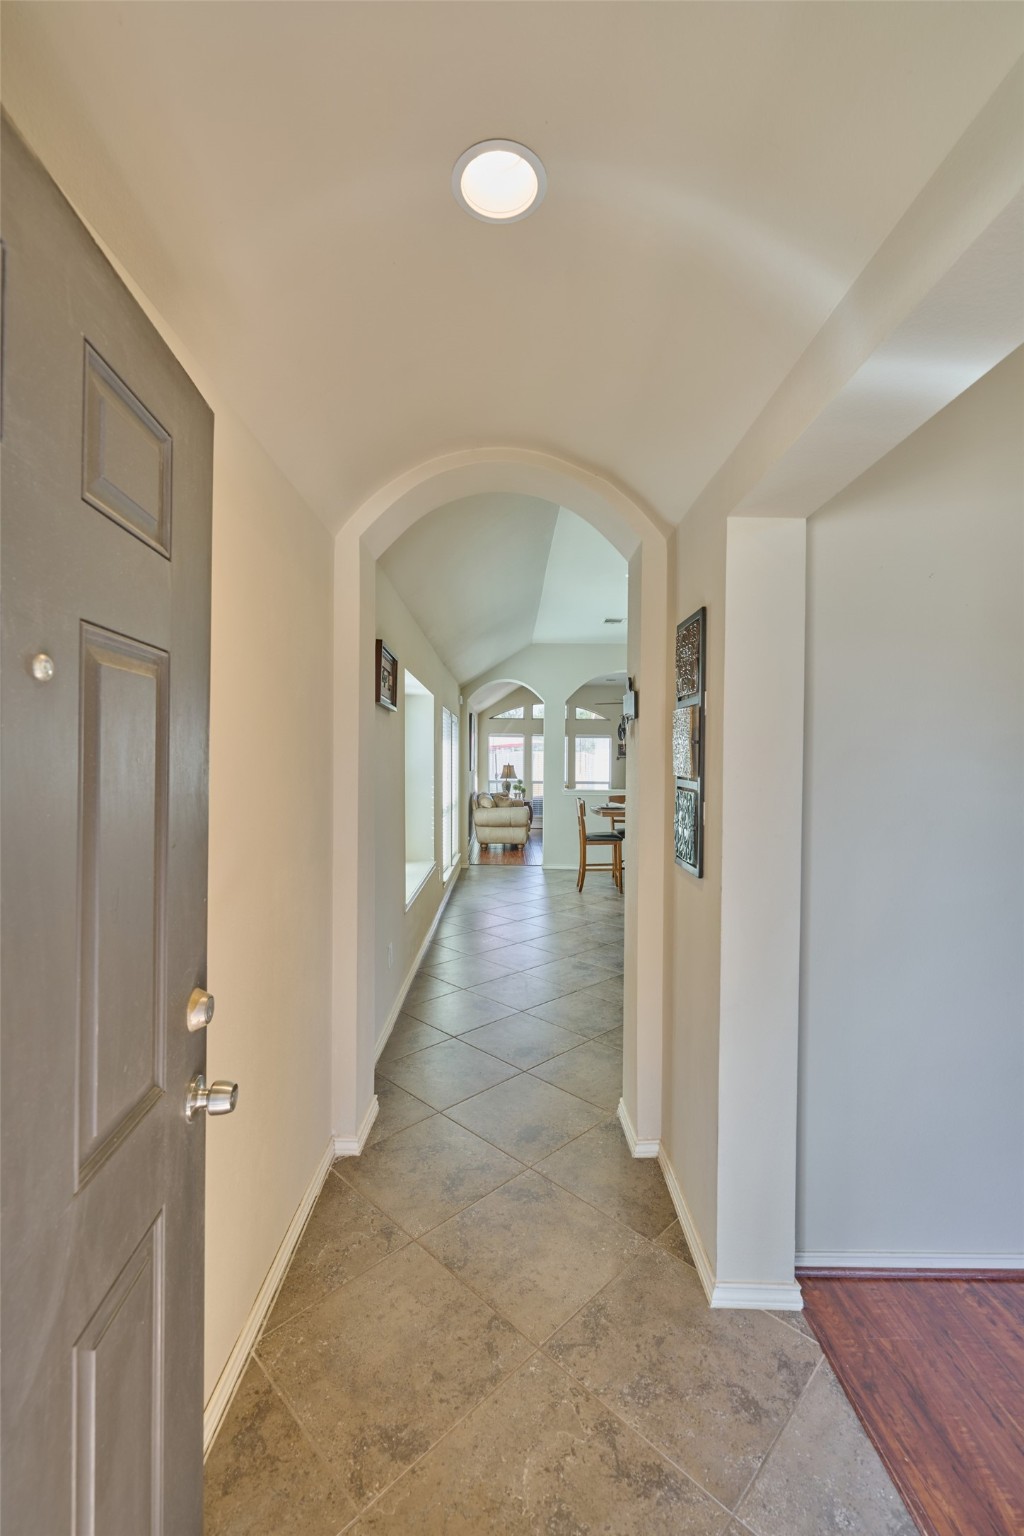 Beautiful arches and an extensive walkway through the home from the front door to the family room makes the home welcoming and inviting.